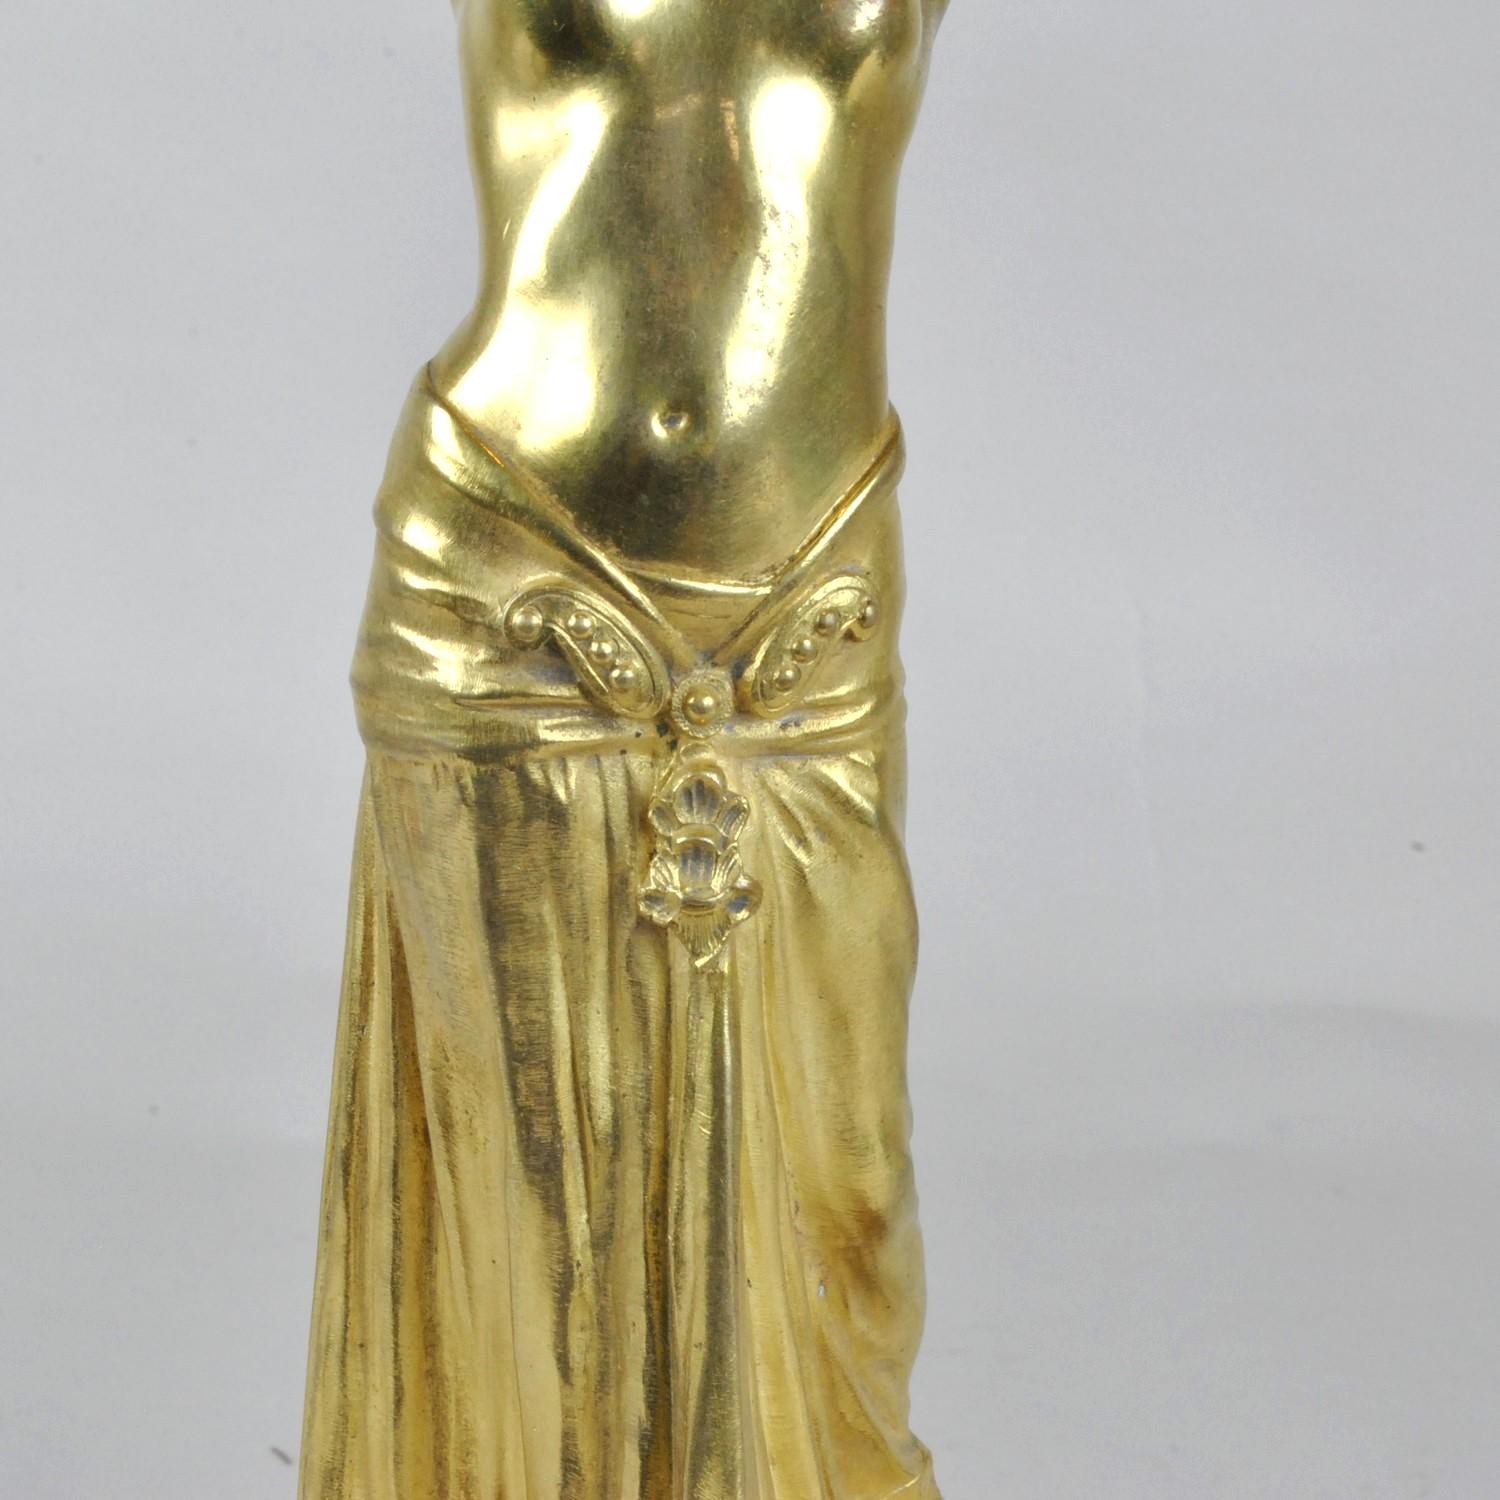 Muller, Priestess, Gilt Bronze Signed, Late 19th Century Early 20th Century For Sale 4